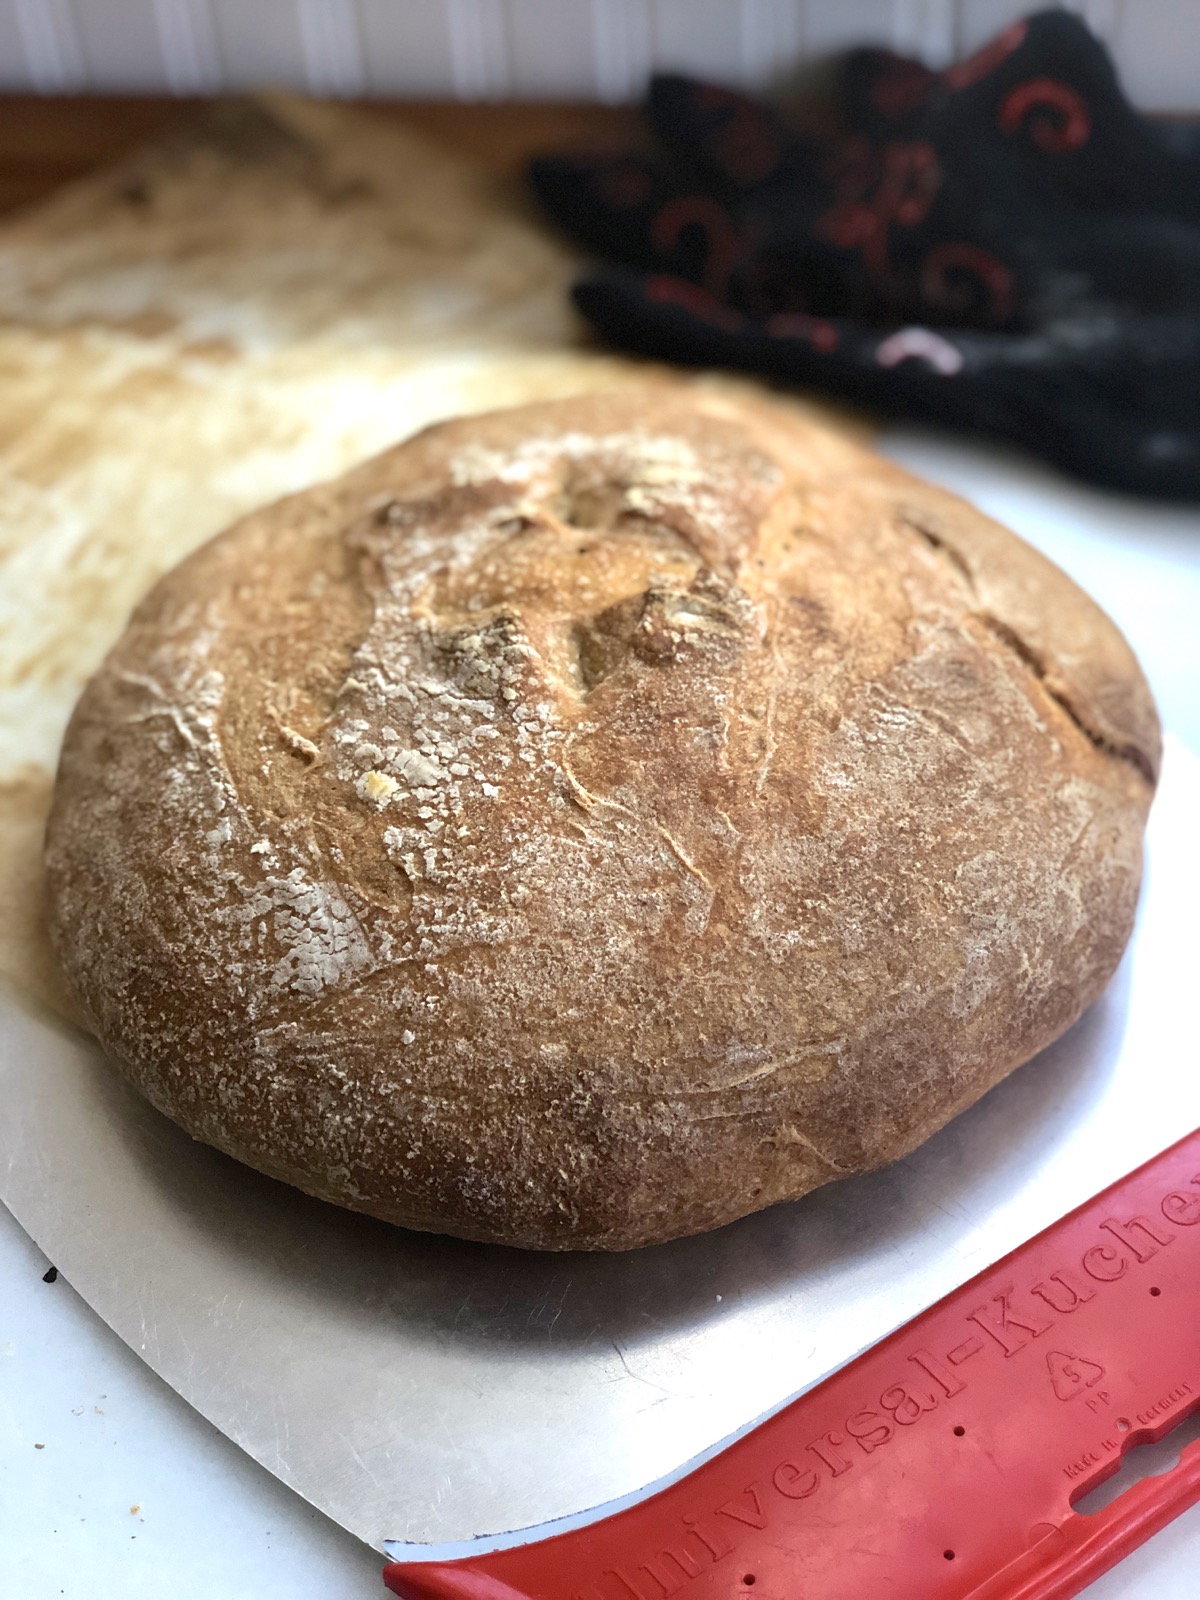 Round, flat loaf of sourdough bread, just out of the oven on a peel.